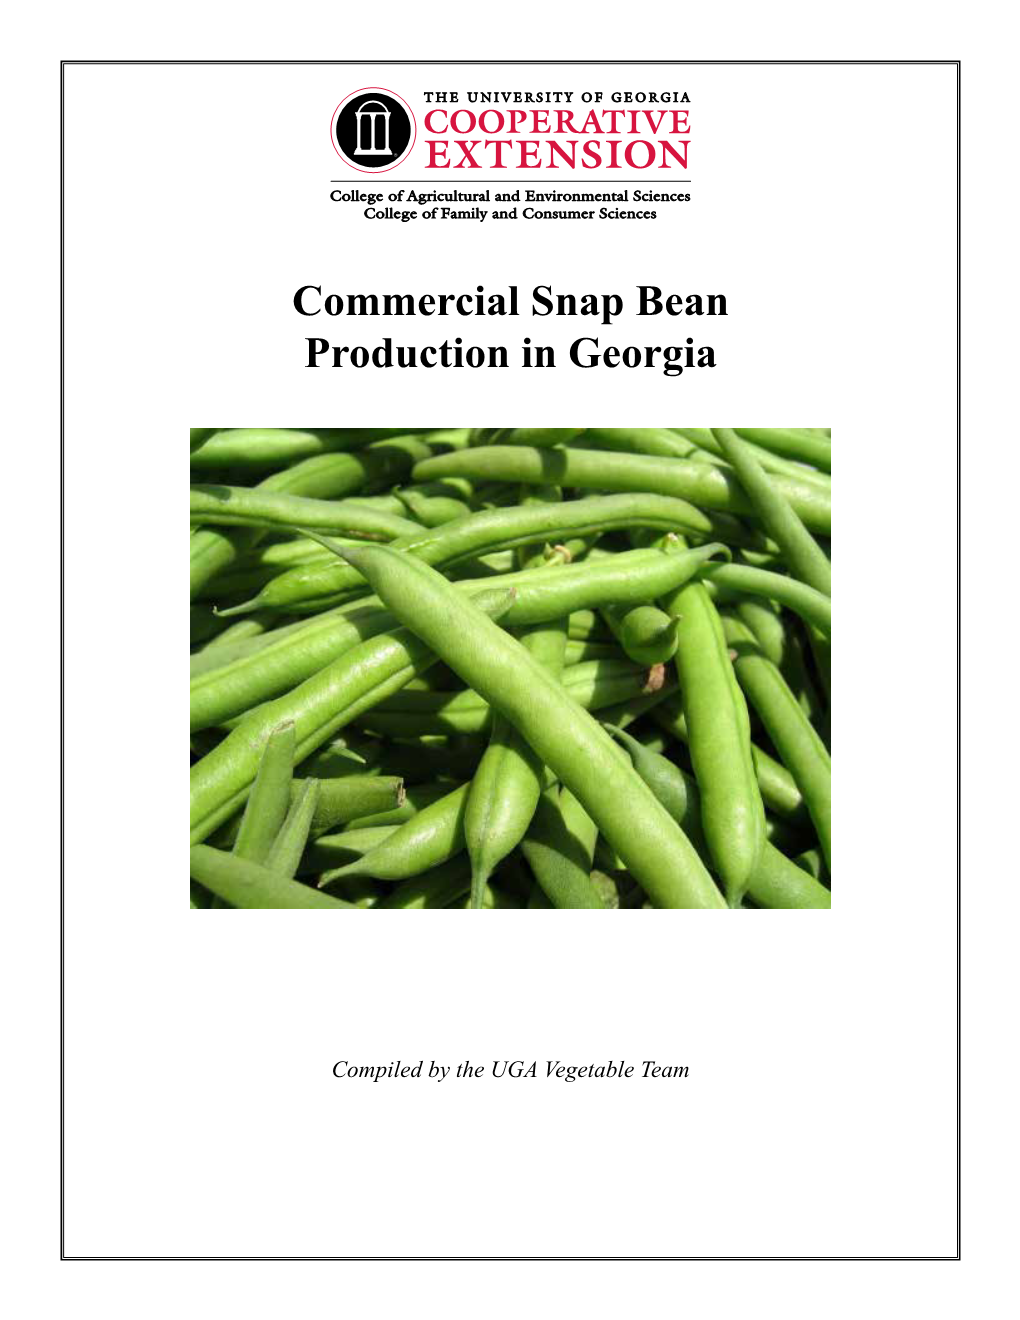 Commercial Snap Bean Production in Georgia